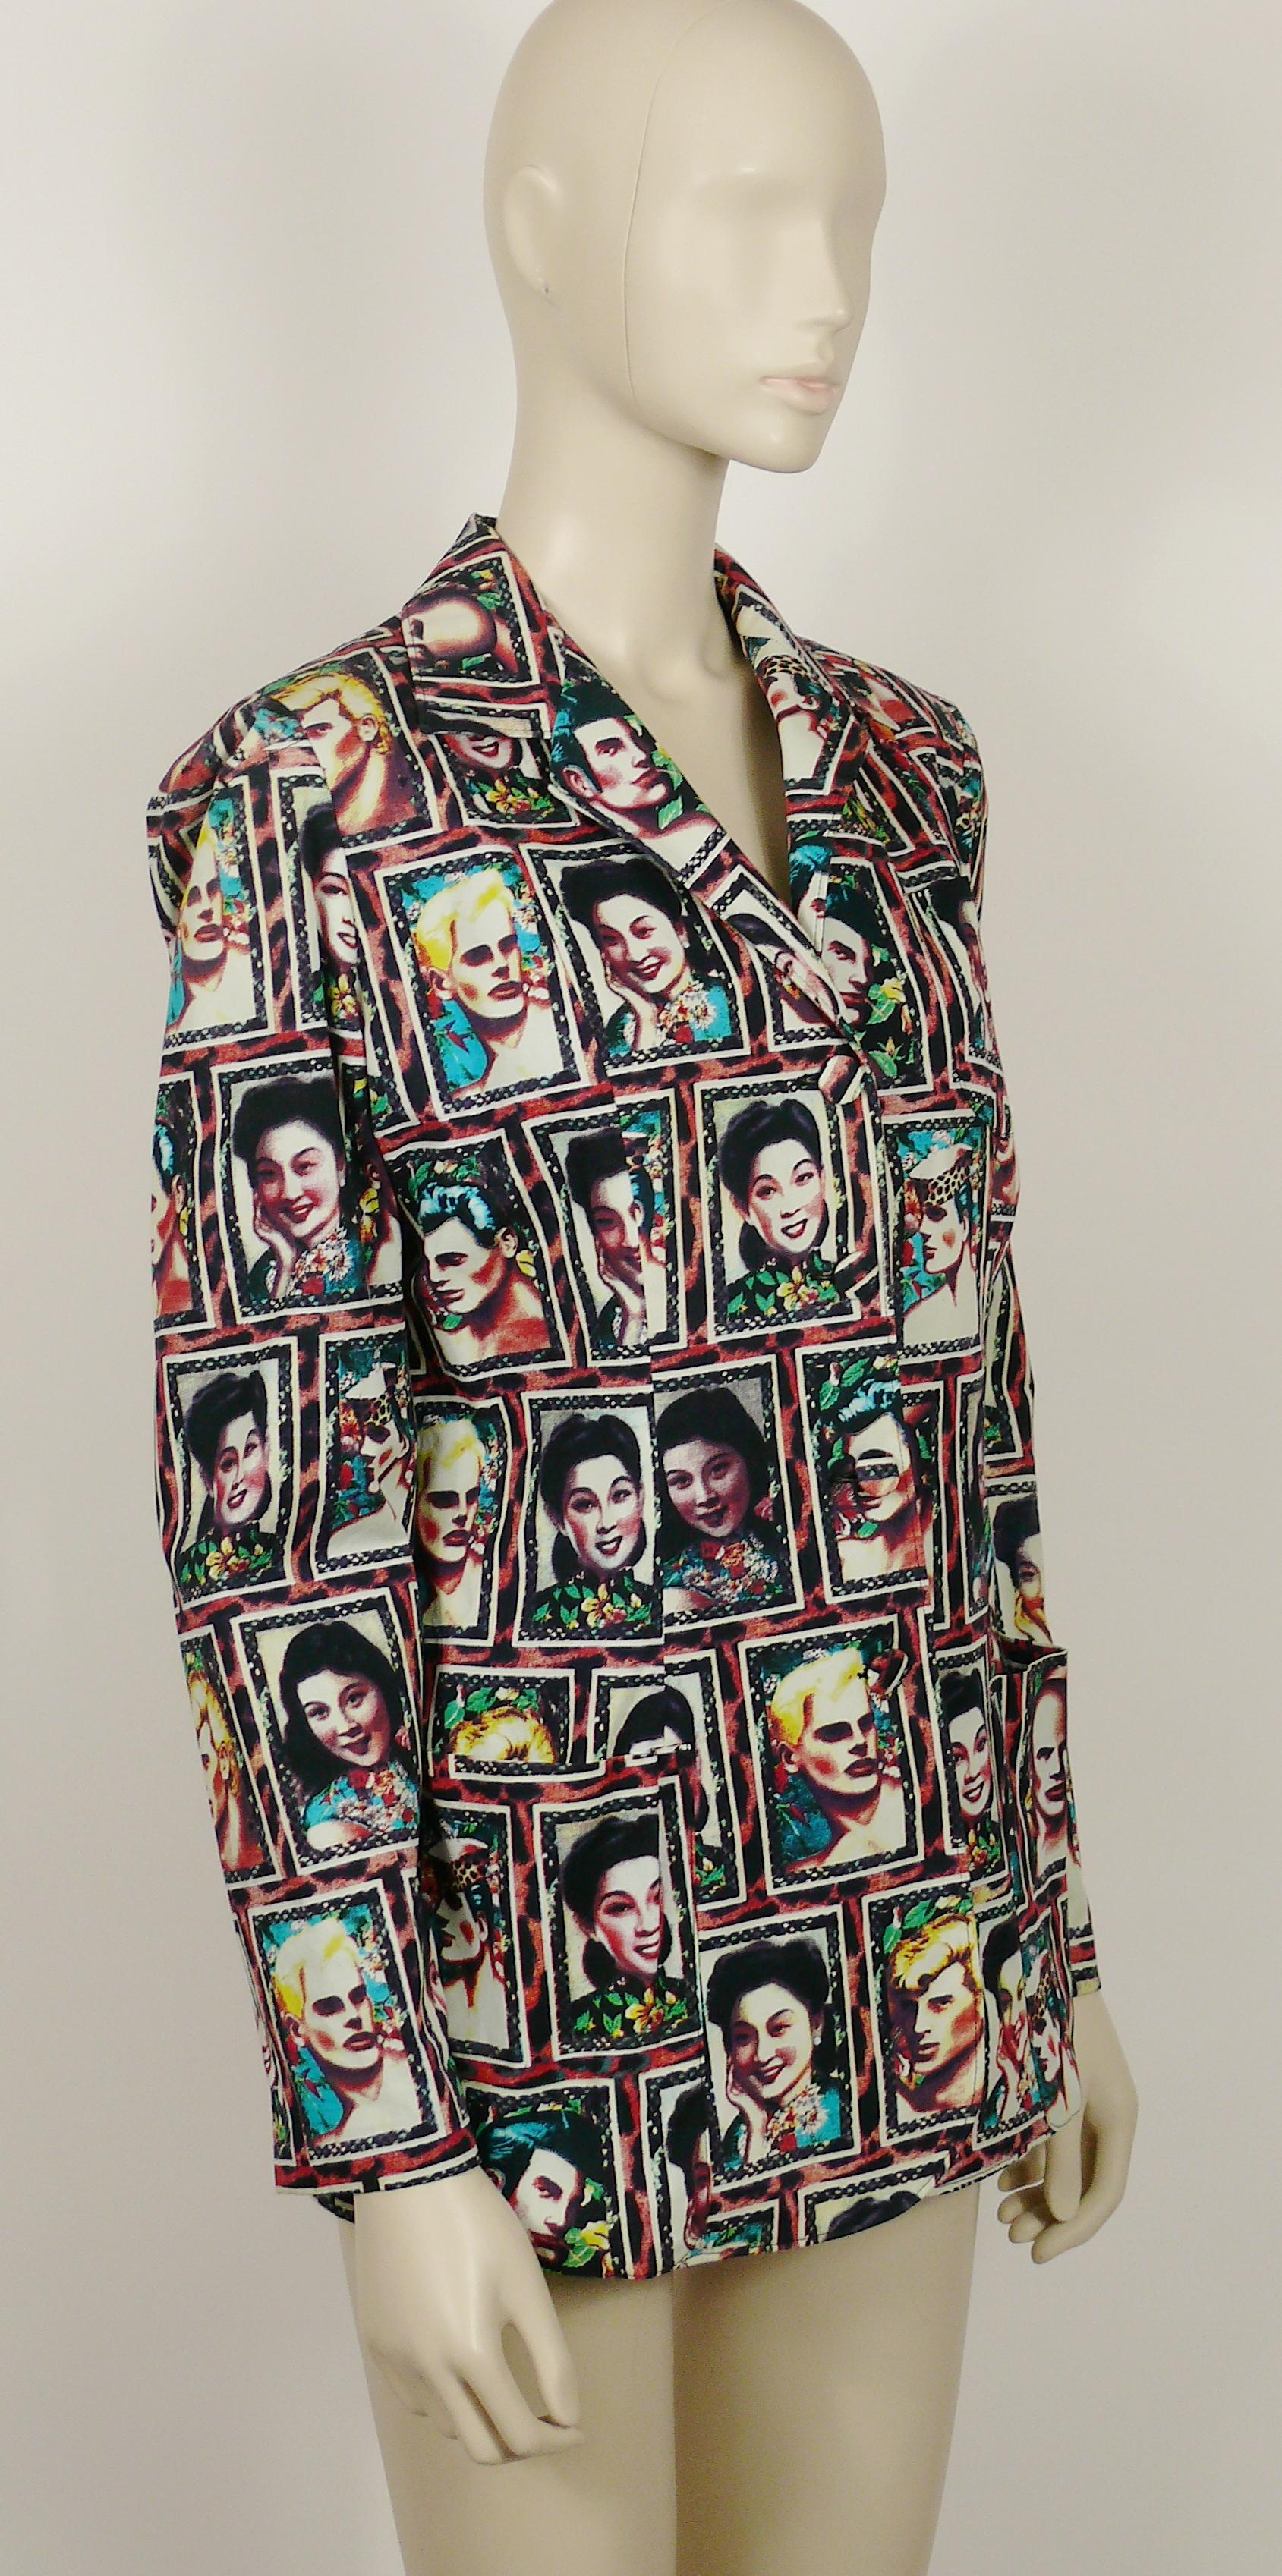 JEAN PAUL GAULTIER vintage rare lightweight cotton jacket featuring gorgeous multicolored retro portraits (males and asiatic females) print all-over.

This jacket features :
- Gorgeous opulent multicolored retro portraits print all-over.
- Classic